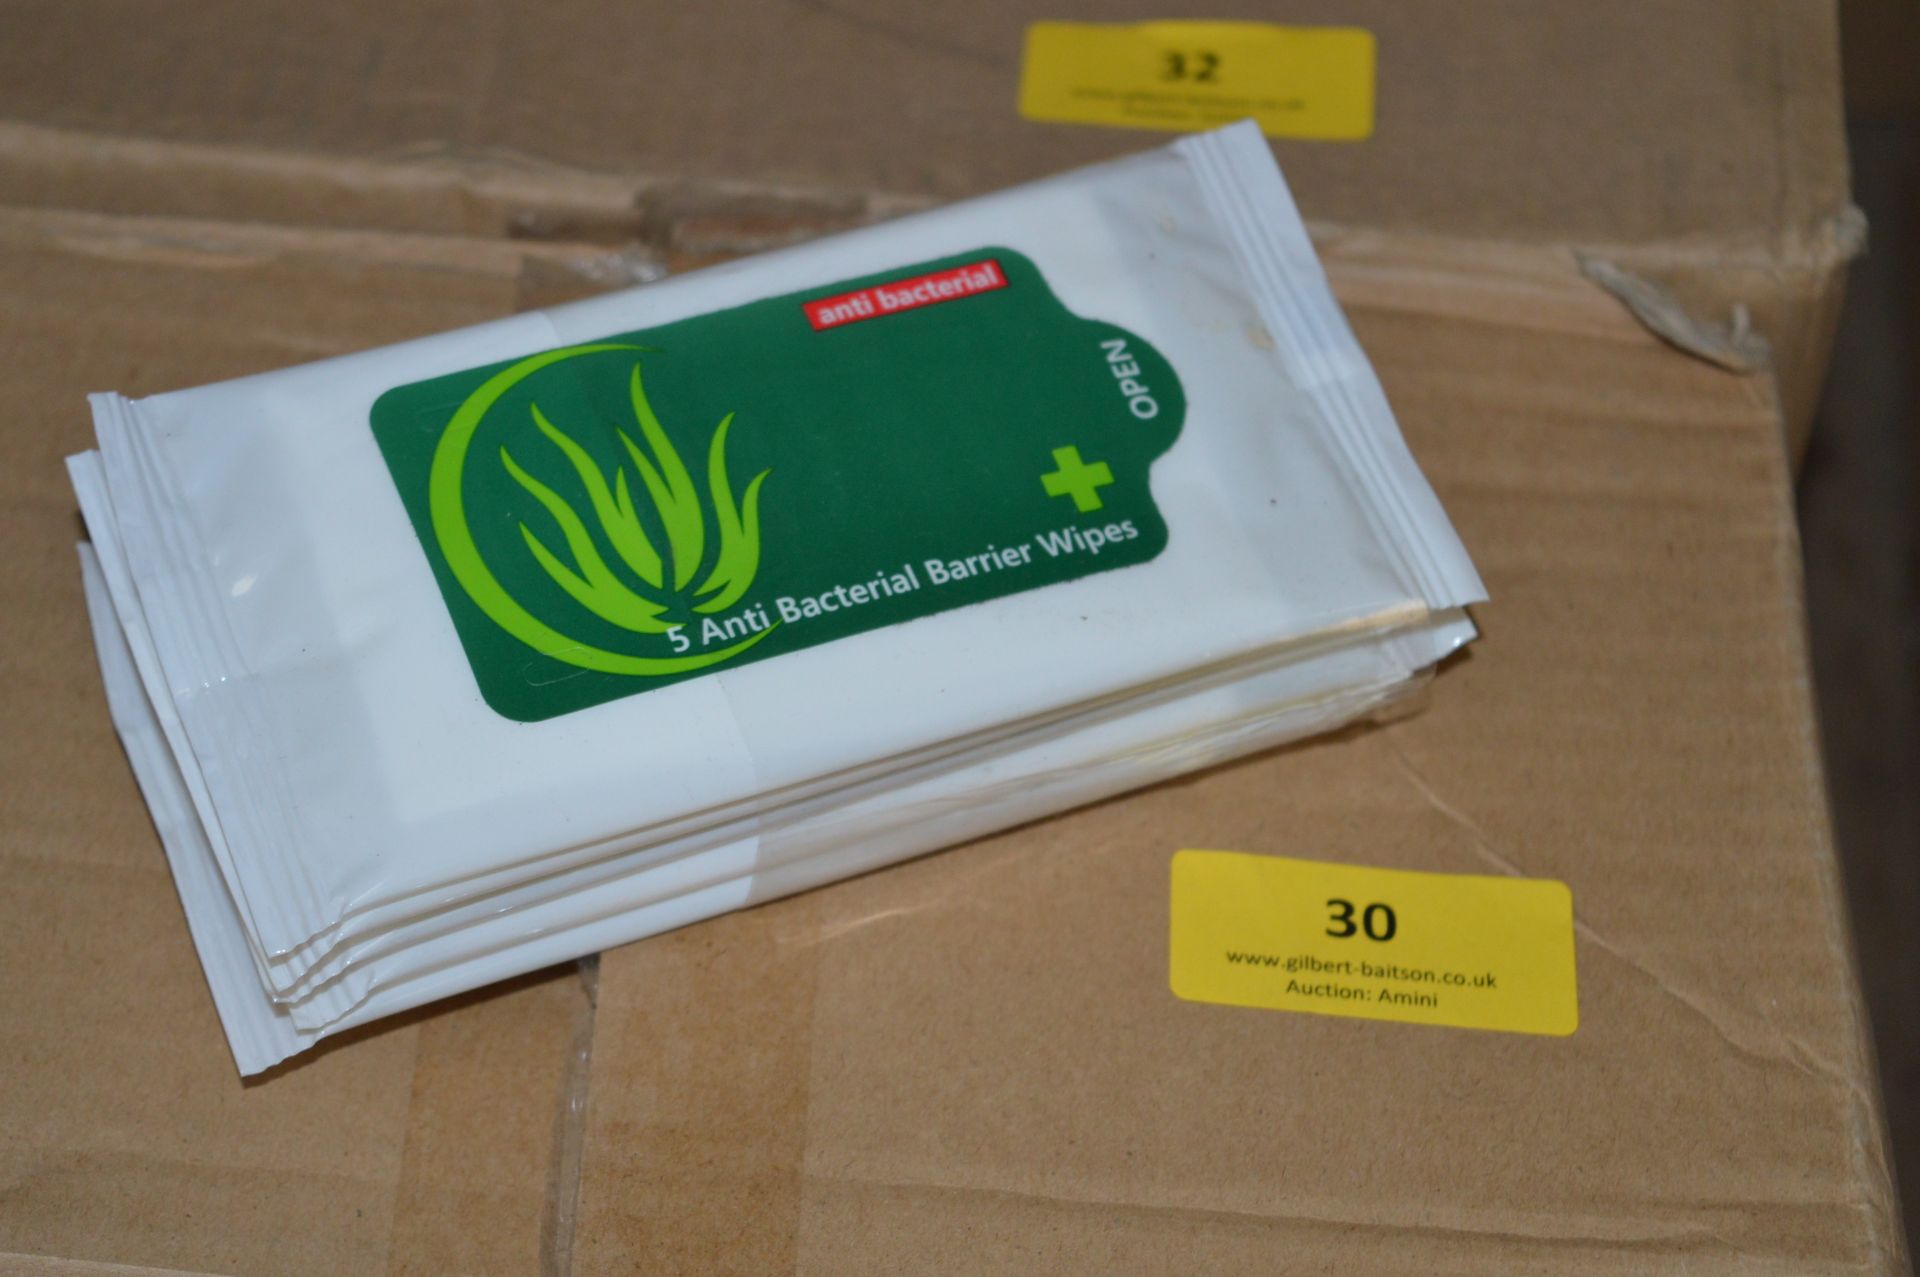 *Two Boxes Containing 24x5 Packs of Antibacterial Wipes